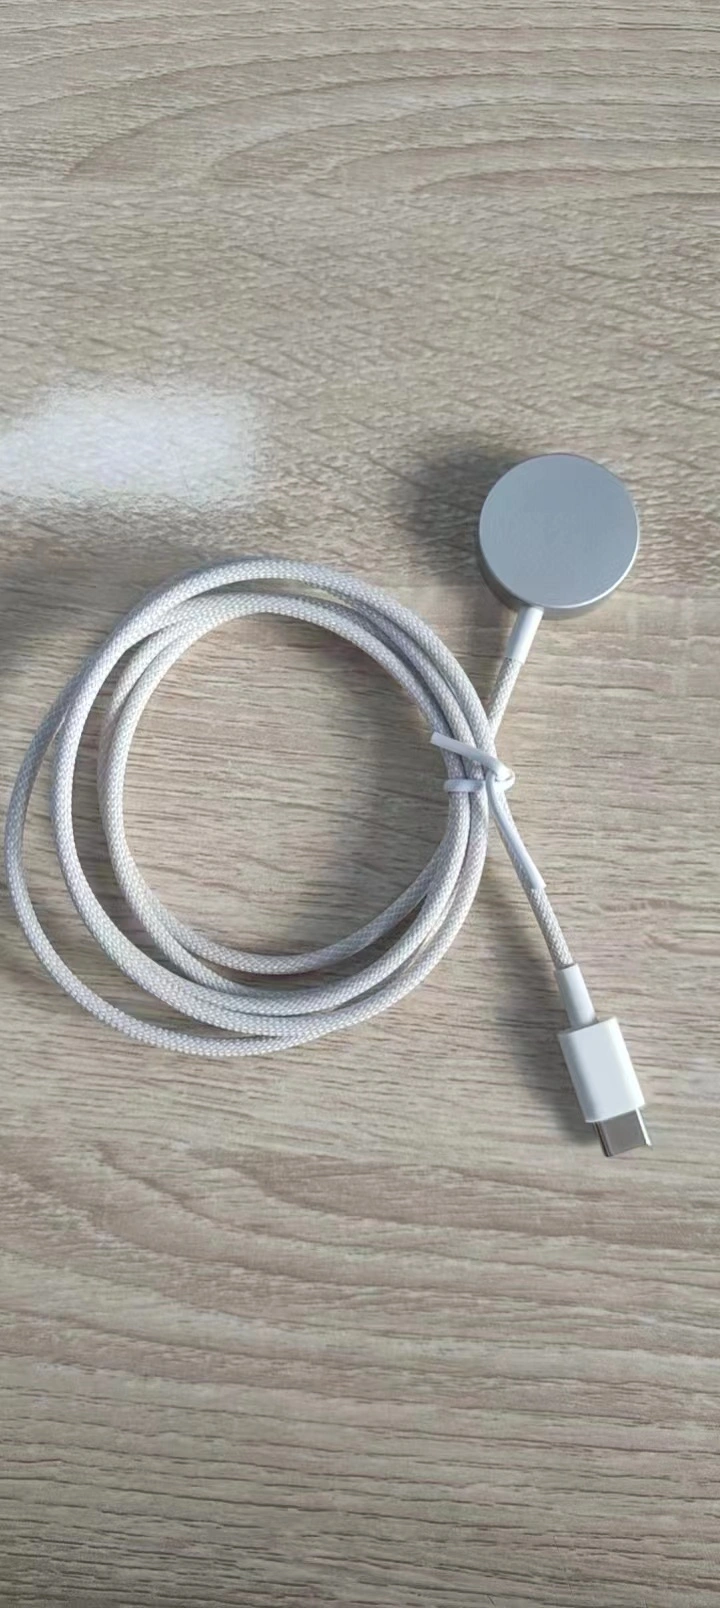 Apple watch wireless charger